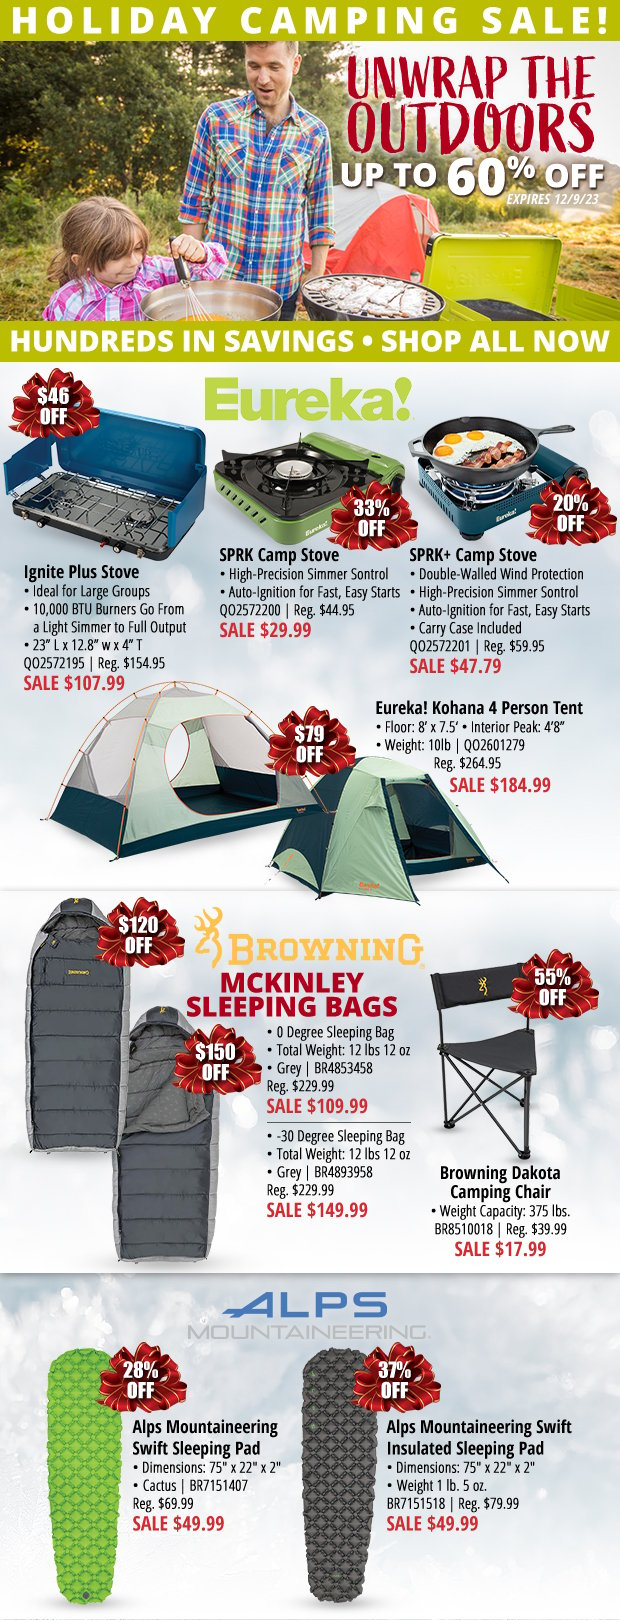 Unwrap the Outdoors With Our Holiday Camping Sale Up to 60% Off